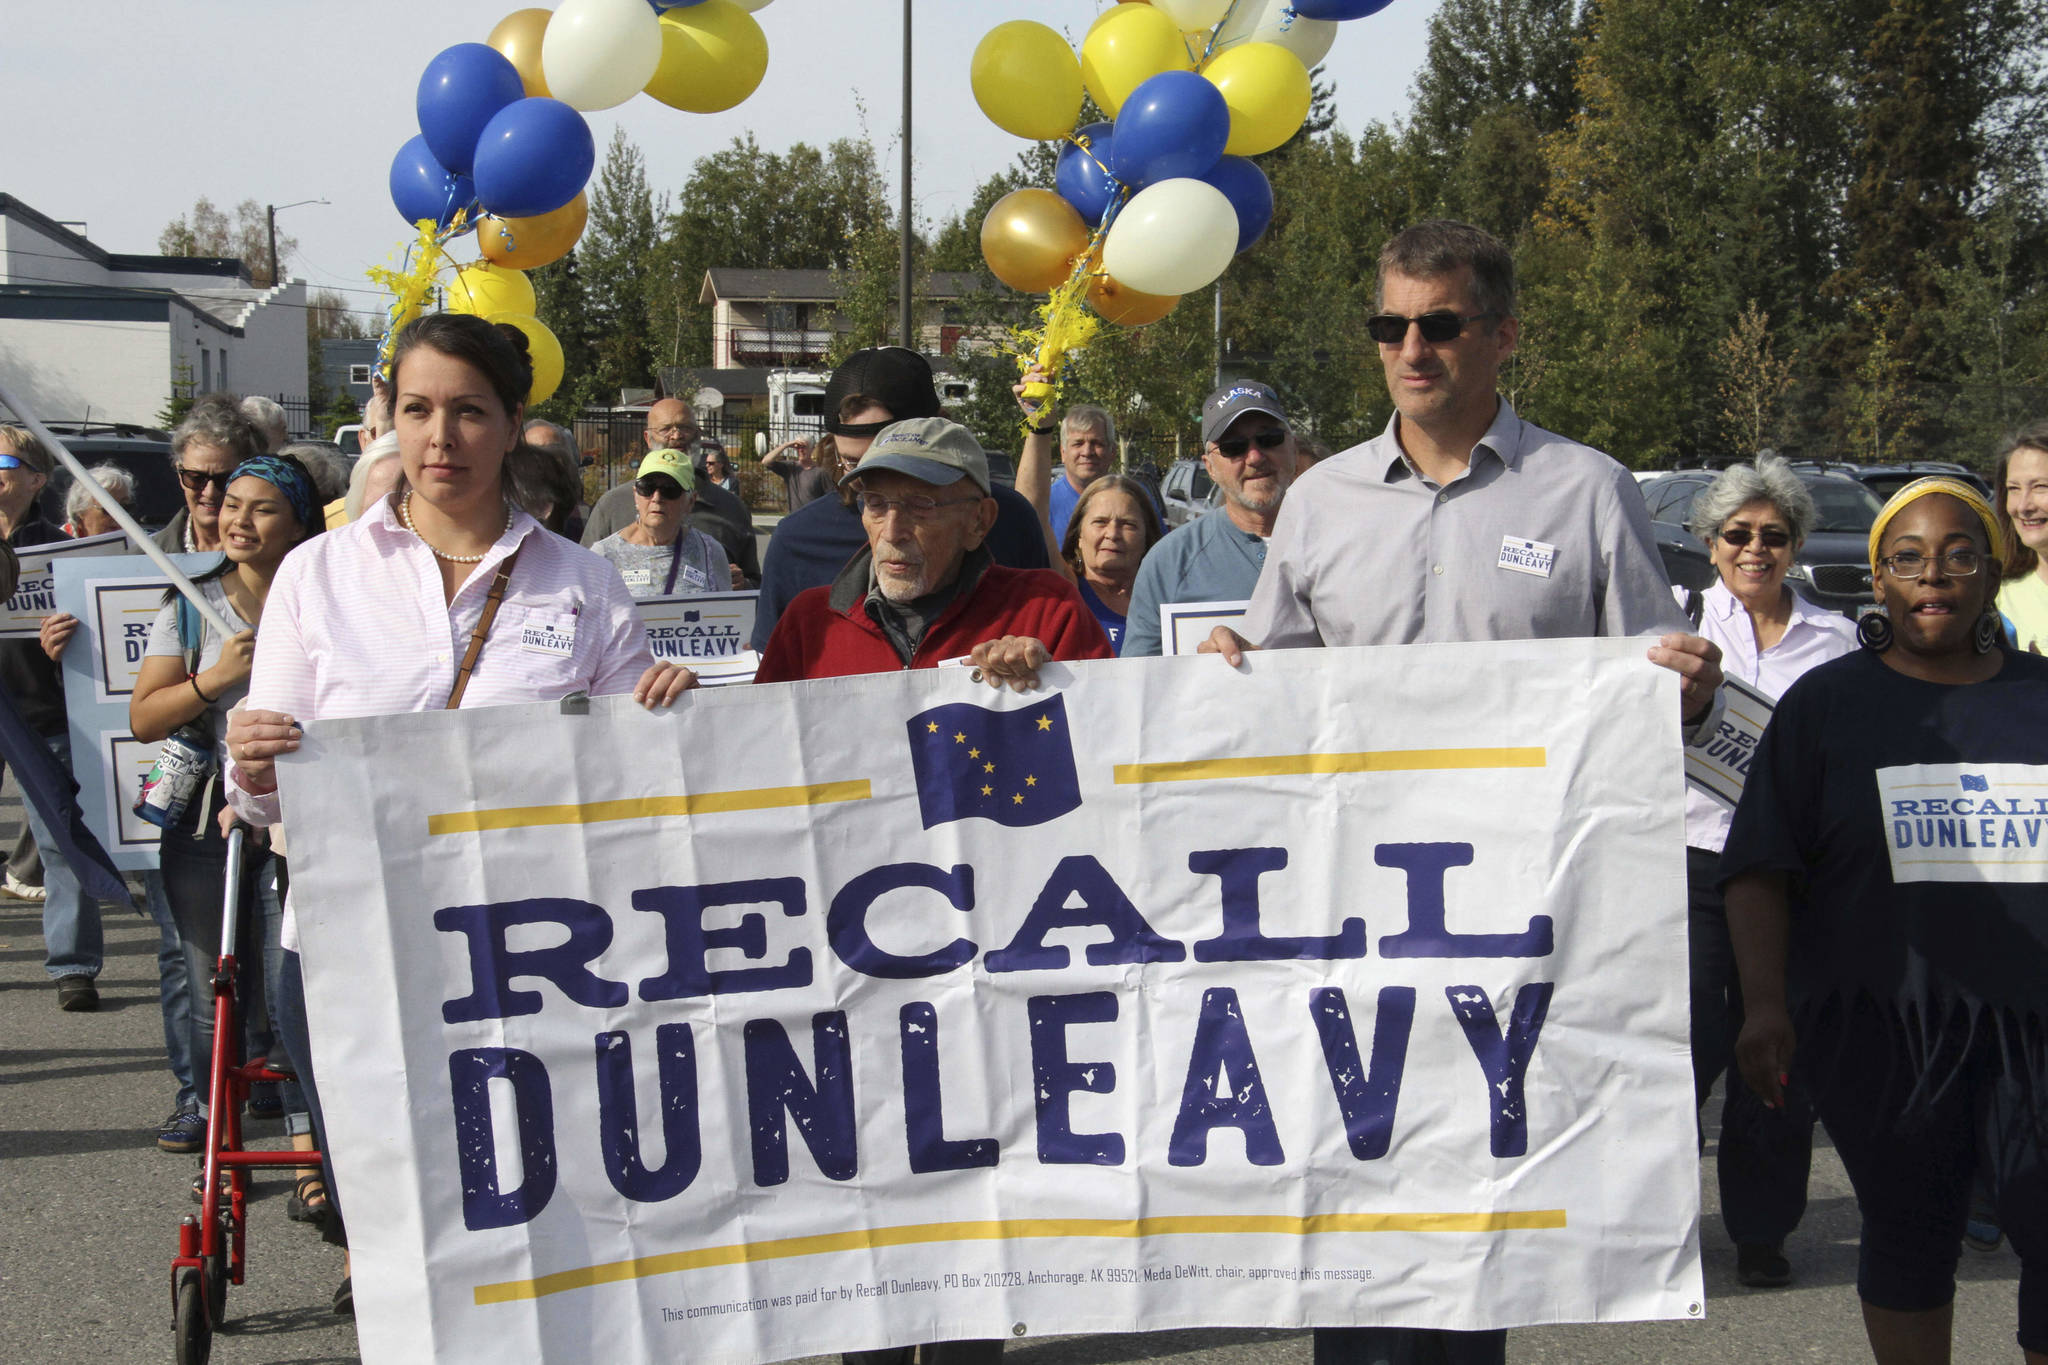 In this Sept. 5, 2019, file photo, Meda DeWitt, left, Vic Fischer, middle, and Aaron Welterlen, leaders of an effort to recall Alaska Gov. Mike Dunleavy, lead about 50 volunteers in a march to the Alaska Division of Elections office in Anchorage, Alaska. The group opposed to Dunleavy has yet to gather enough signatures to force a recall election, nearly two years after launching and with just over a year before the 2022 primary election. (AP Photo/Mark Thiessen, File)